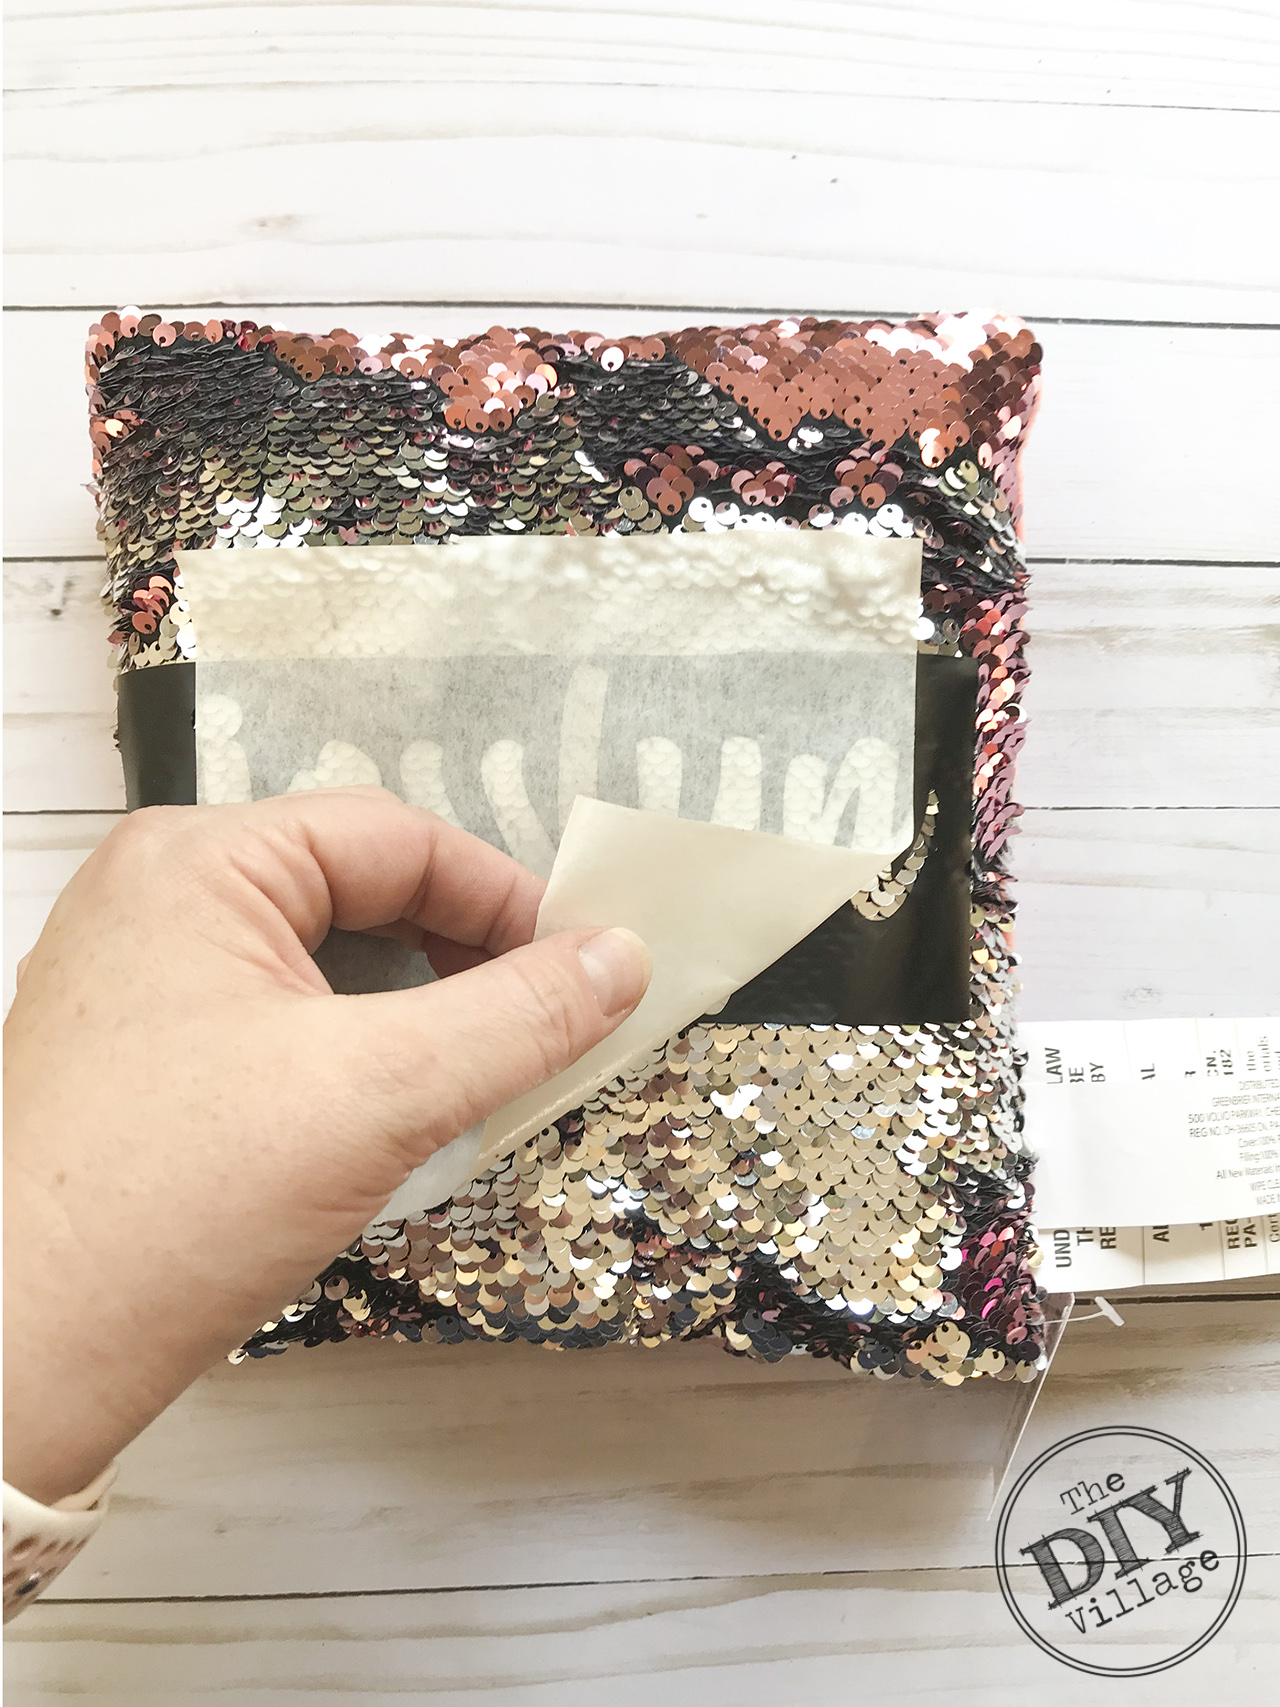 Easy Dollar Store Project - DIY Hidden Message sequin Pillow. They can be personalized with names, messages, anything! Such a fun idea. #hiddenmessagepillow #diycraft #sequinpillow #personalizedgift #monogrmamedgift #bling #sparkle #dollarstorecraft #dollarstorechallenge #fastcraft